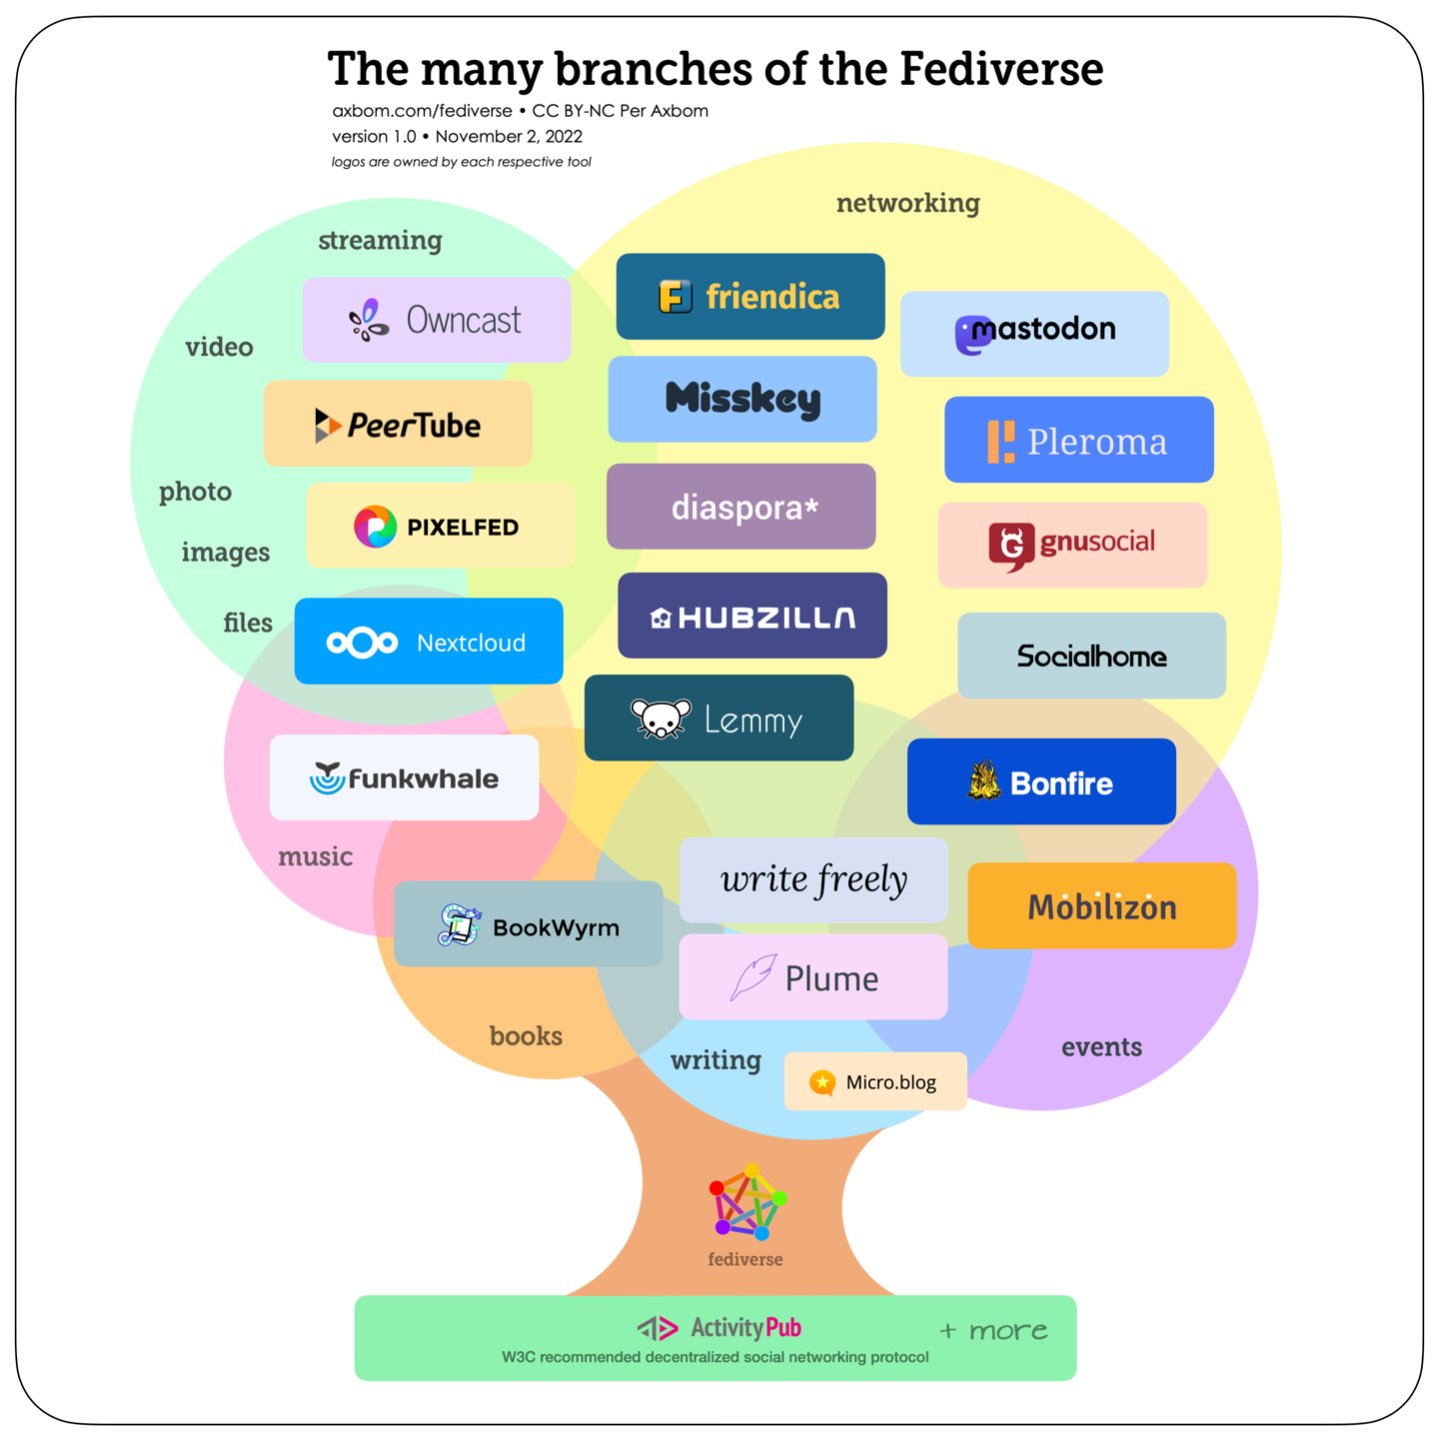 The many branches of the Fediverse